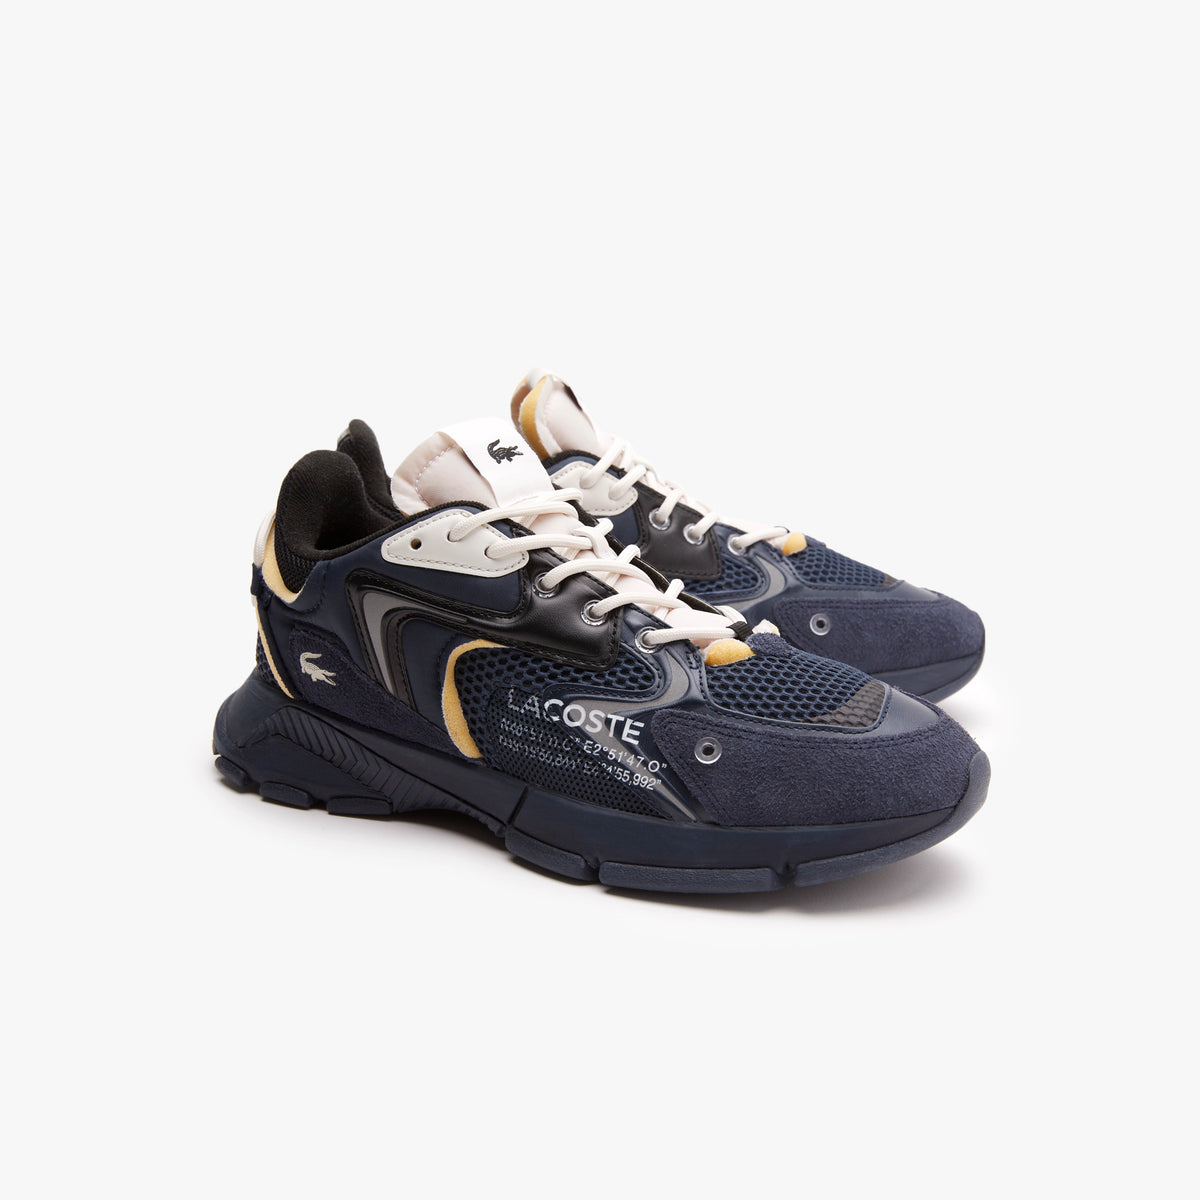 Lacoste - L003 Neo Textile Sneakers - Navy